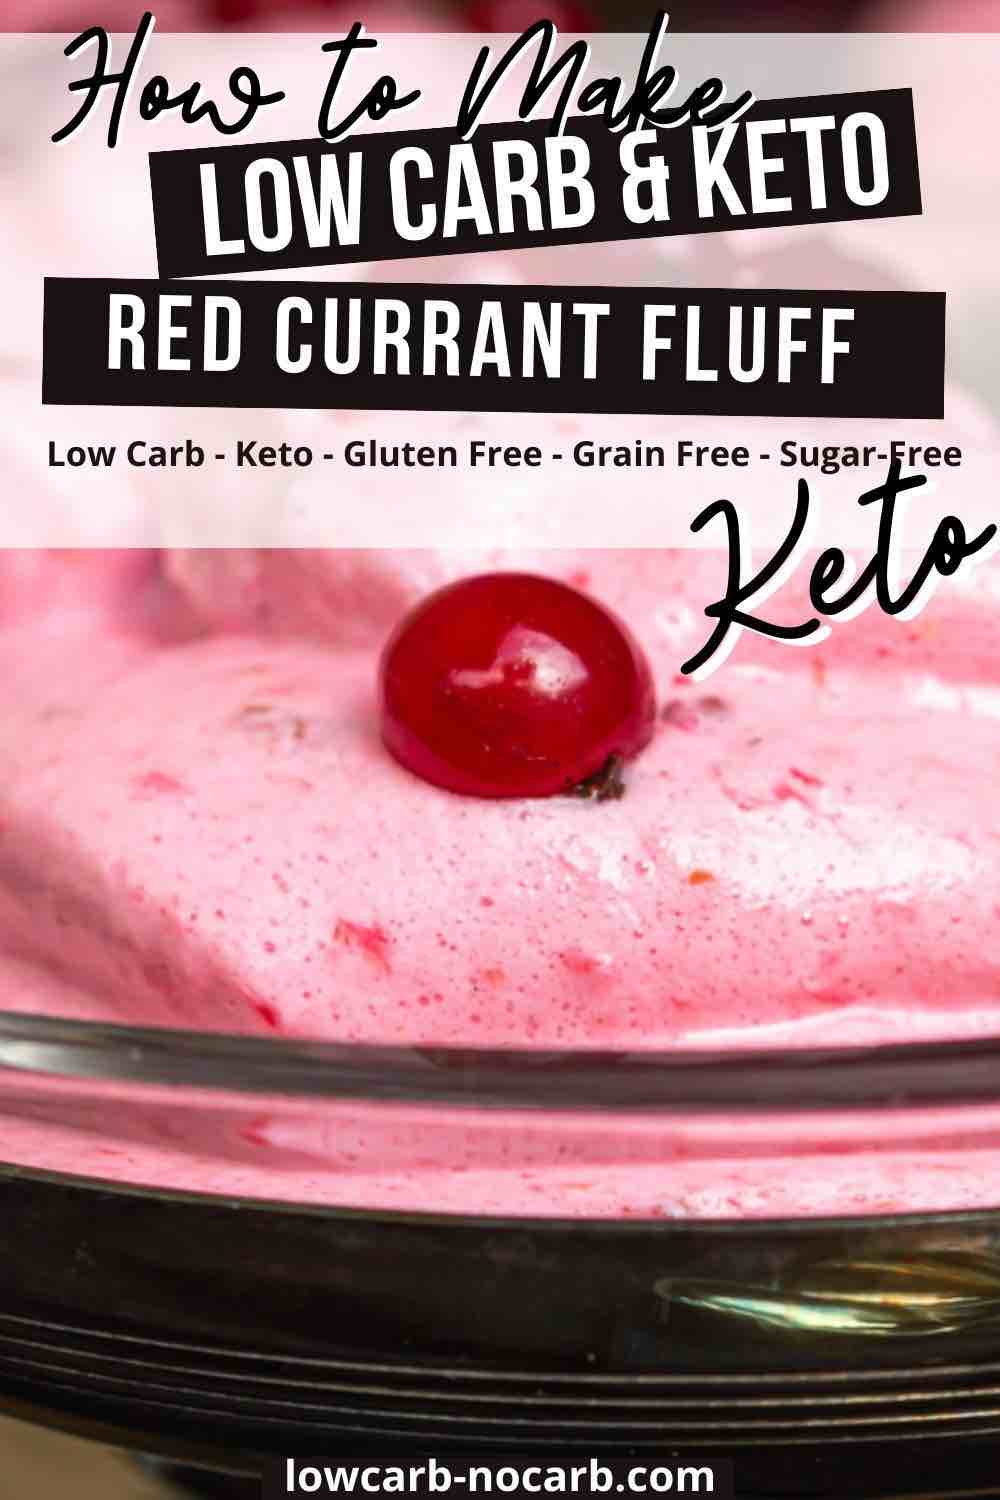 Keto Fluff close up with berry.